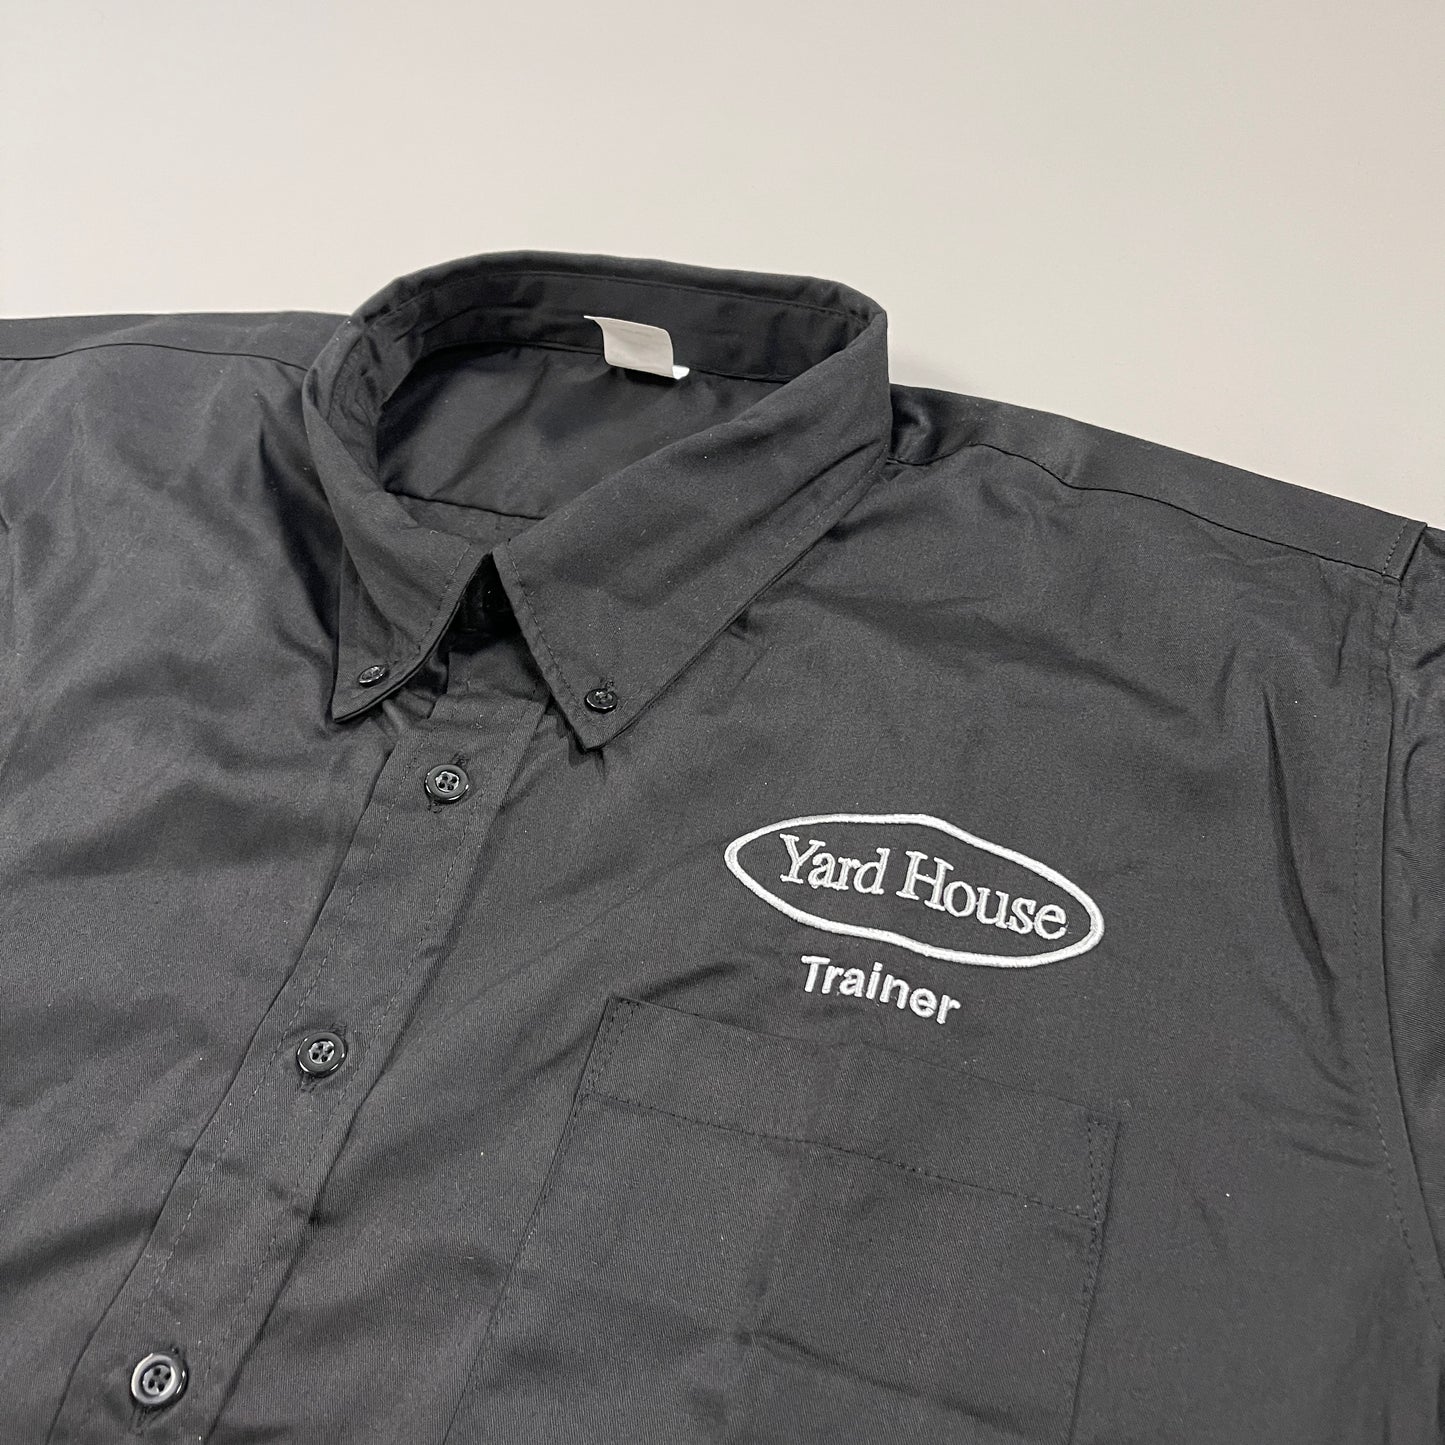 YARD HOUSE Employee "Trainer" Button Up Collared Shirt Men's Sz L Black (New)